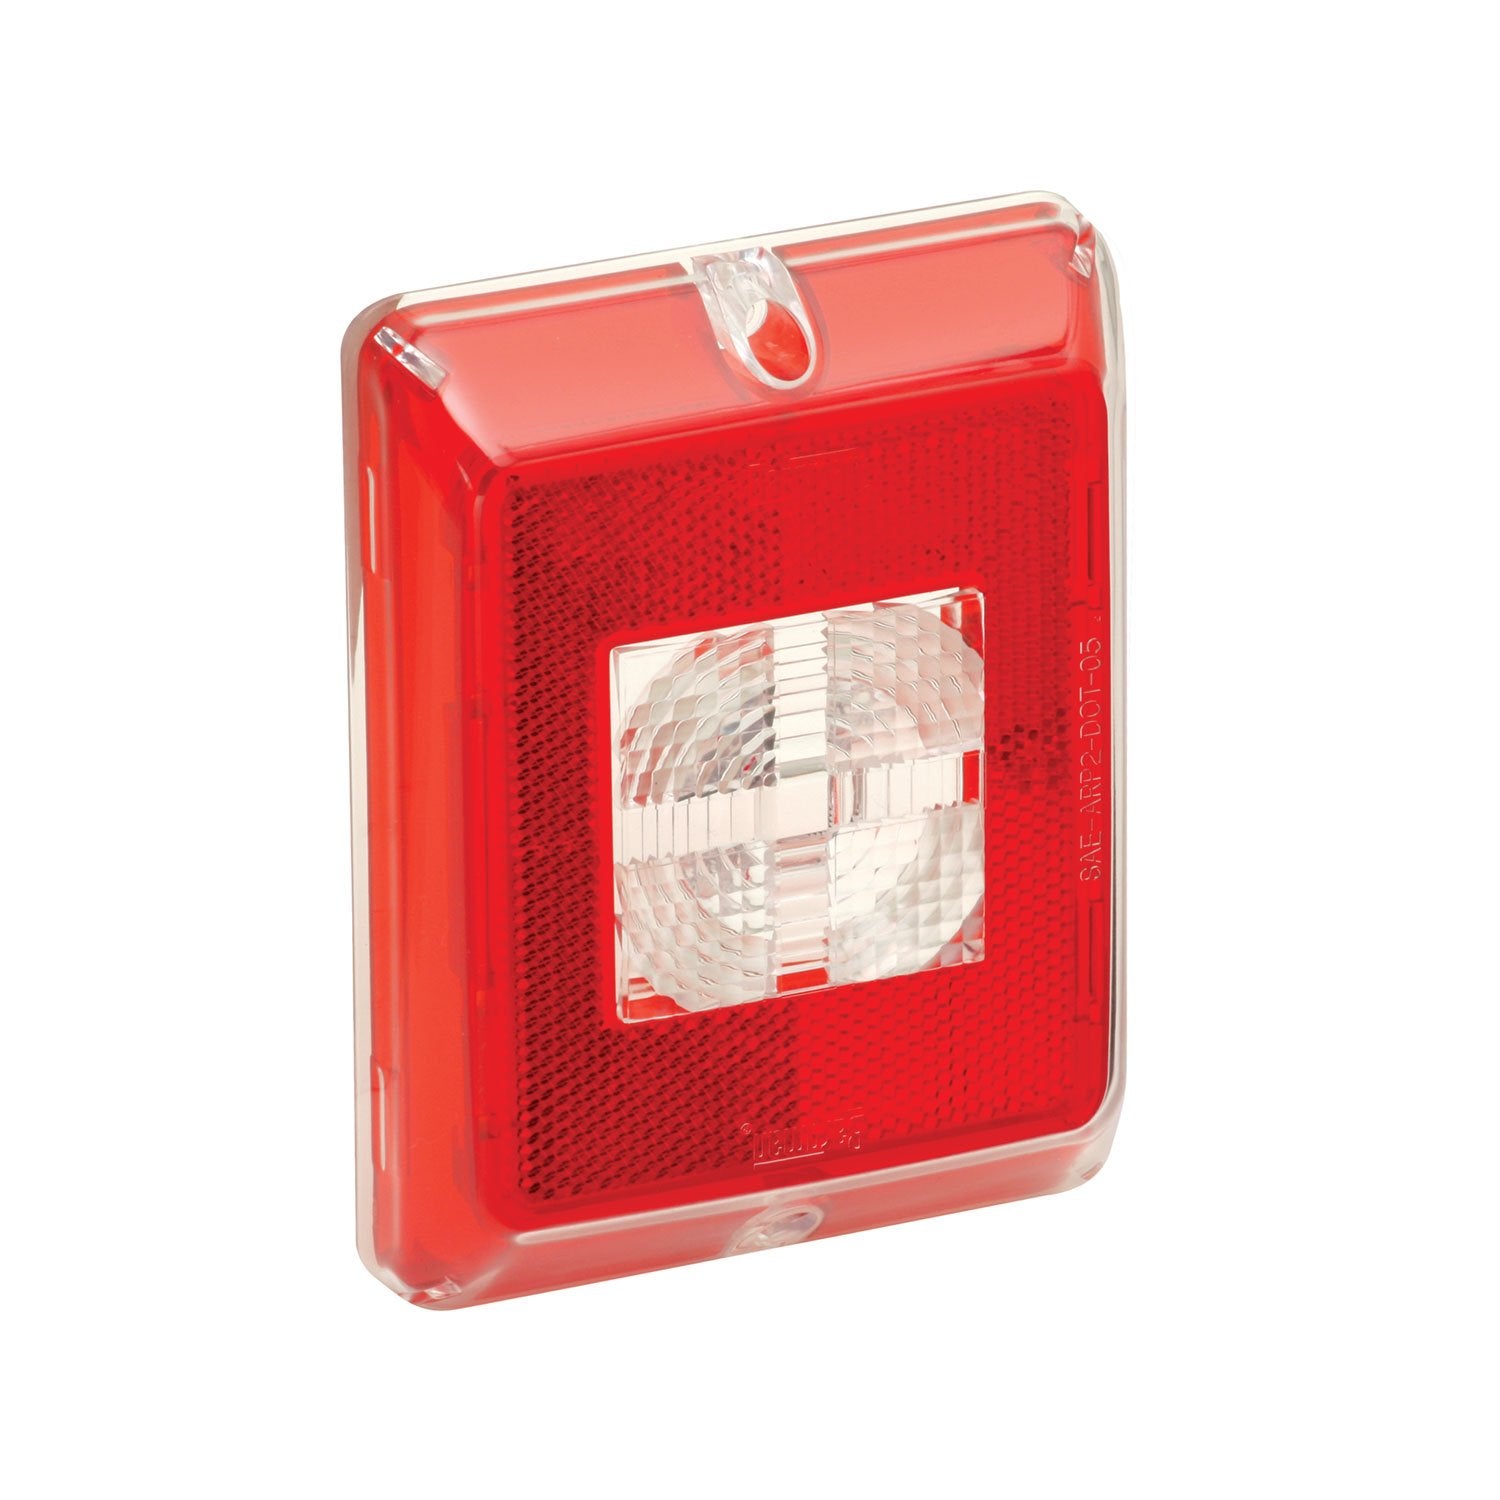 Fulton Bargman 48-84-711 Enhanced Height Incandescent Reflex (with Clear Center Backup Lens - Red Border)